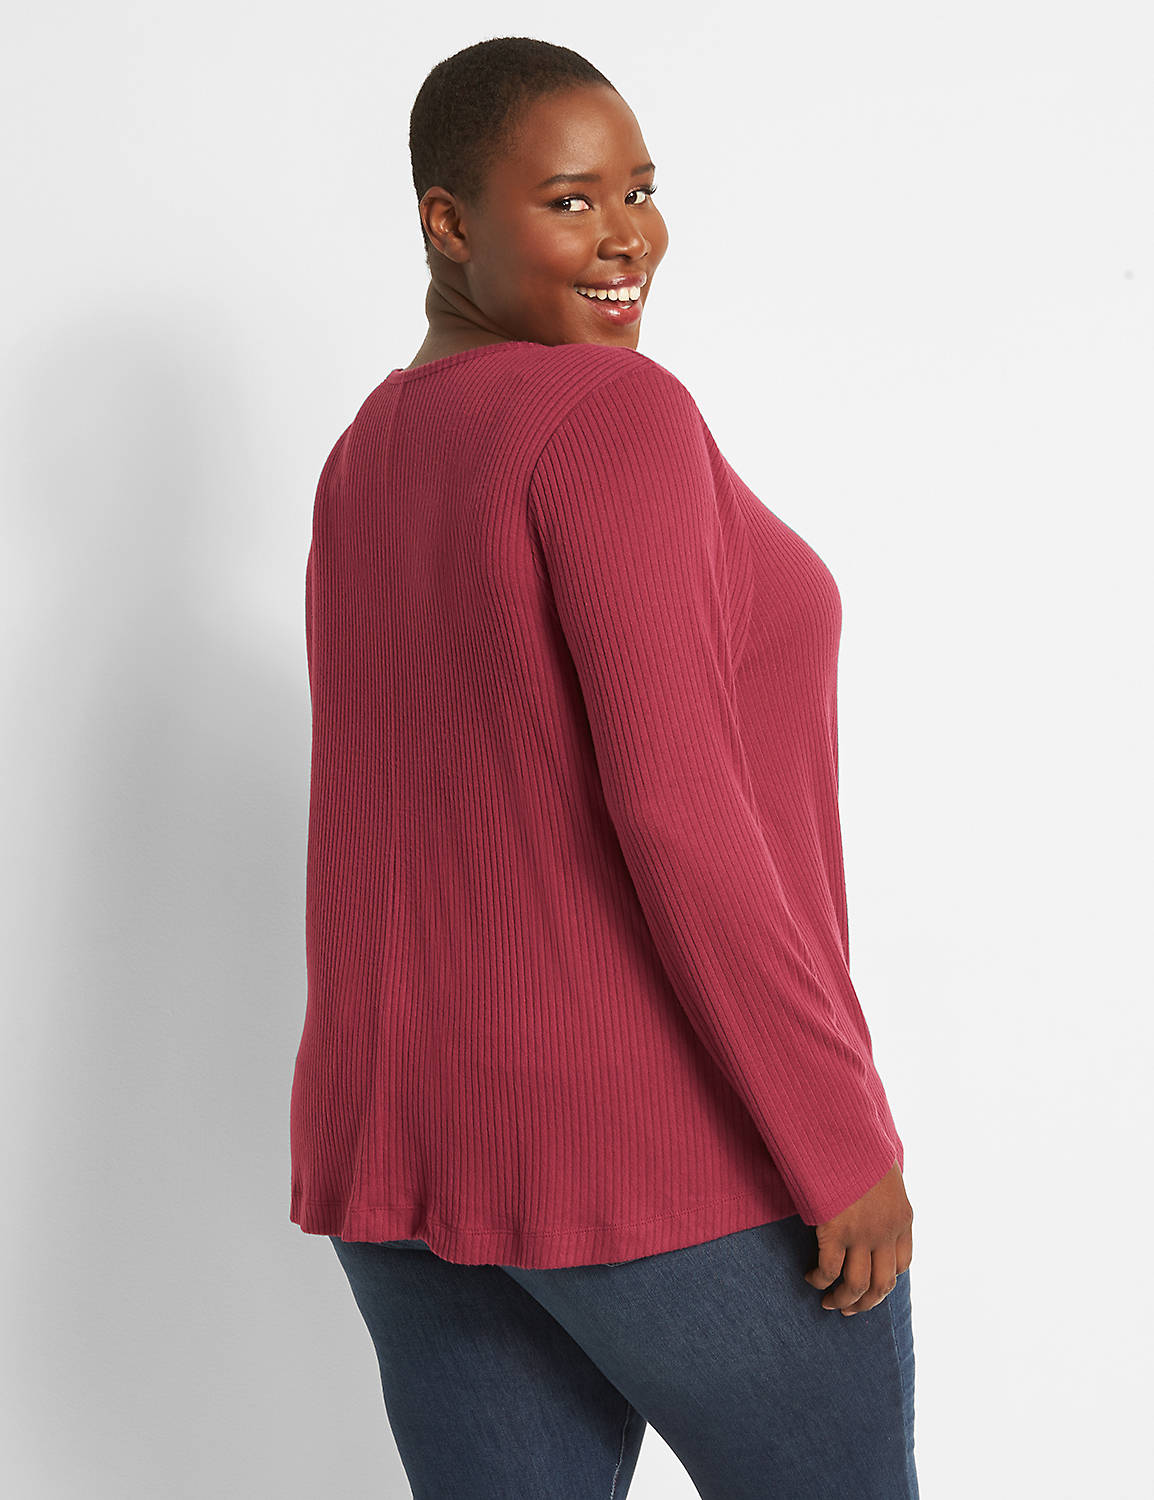 Long Sleeve Notch Neck Swing Tee Solid 1123735 copy of 1123731:PANTONE Beaujolais:10/12 Product Image 2